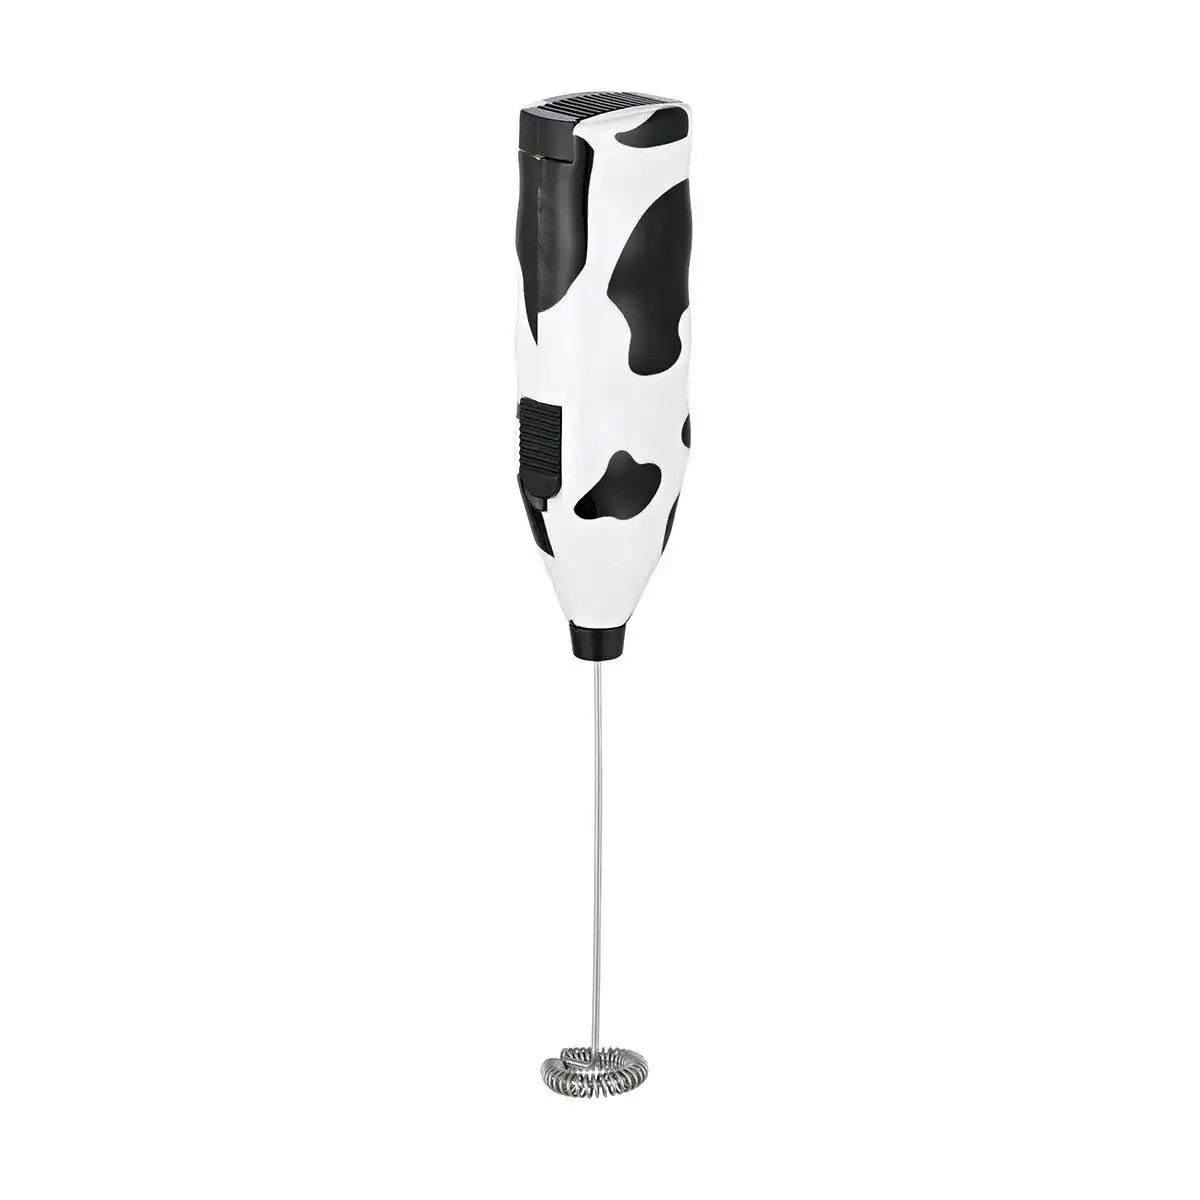 Avanti Little Whipper Milk Frother With Stand   Mooo